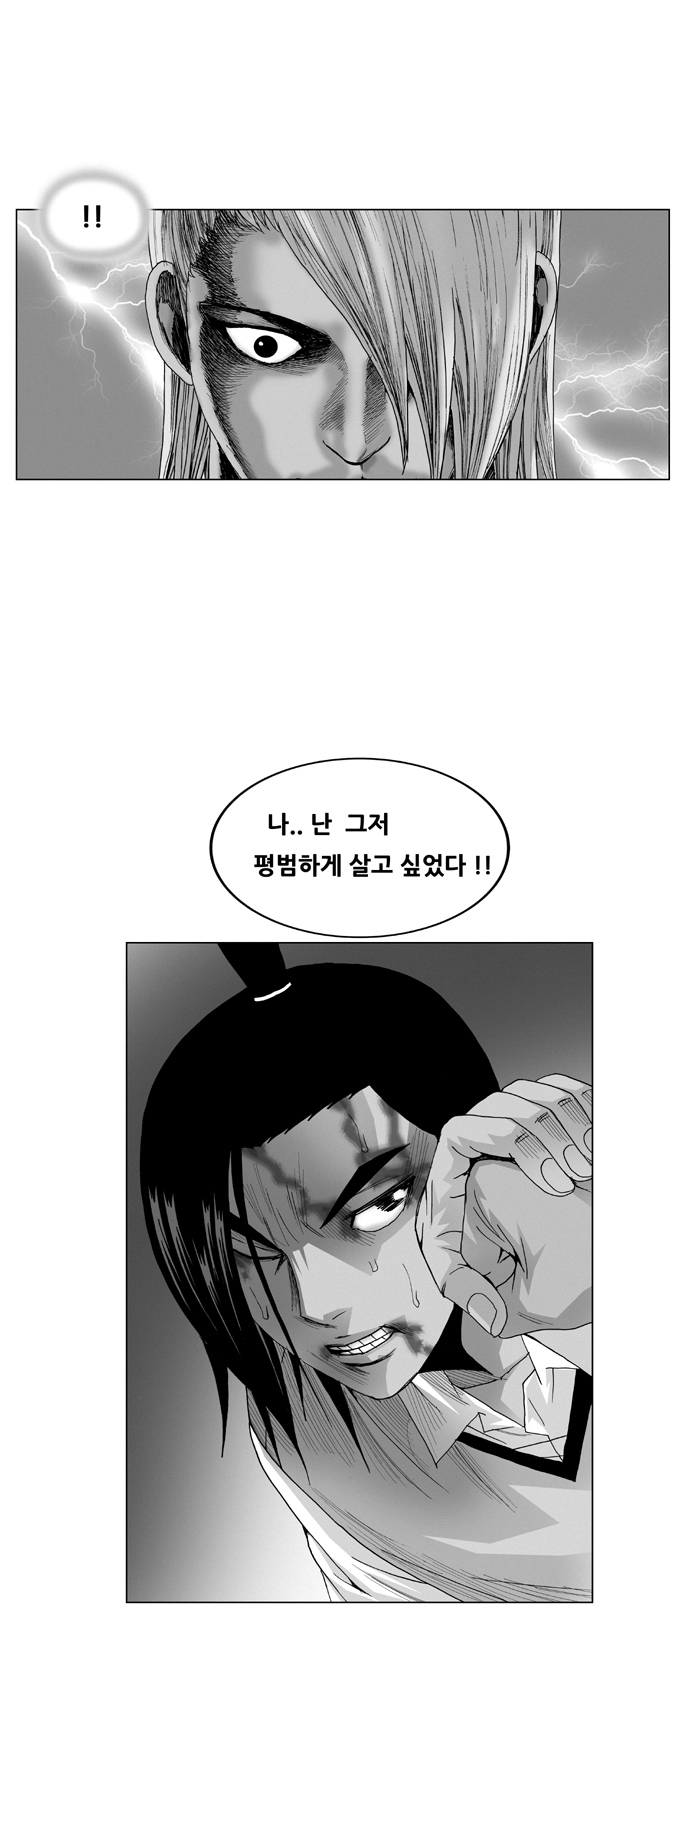 Ultimate Legend - Kang Hae Hyo - Chapter 54 - Page 1